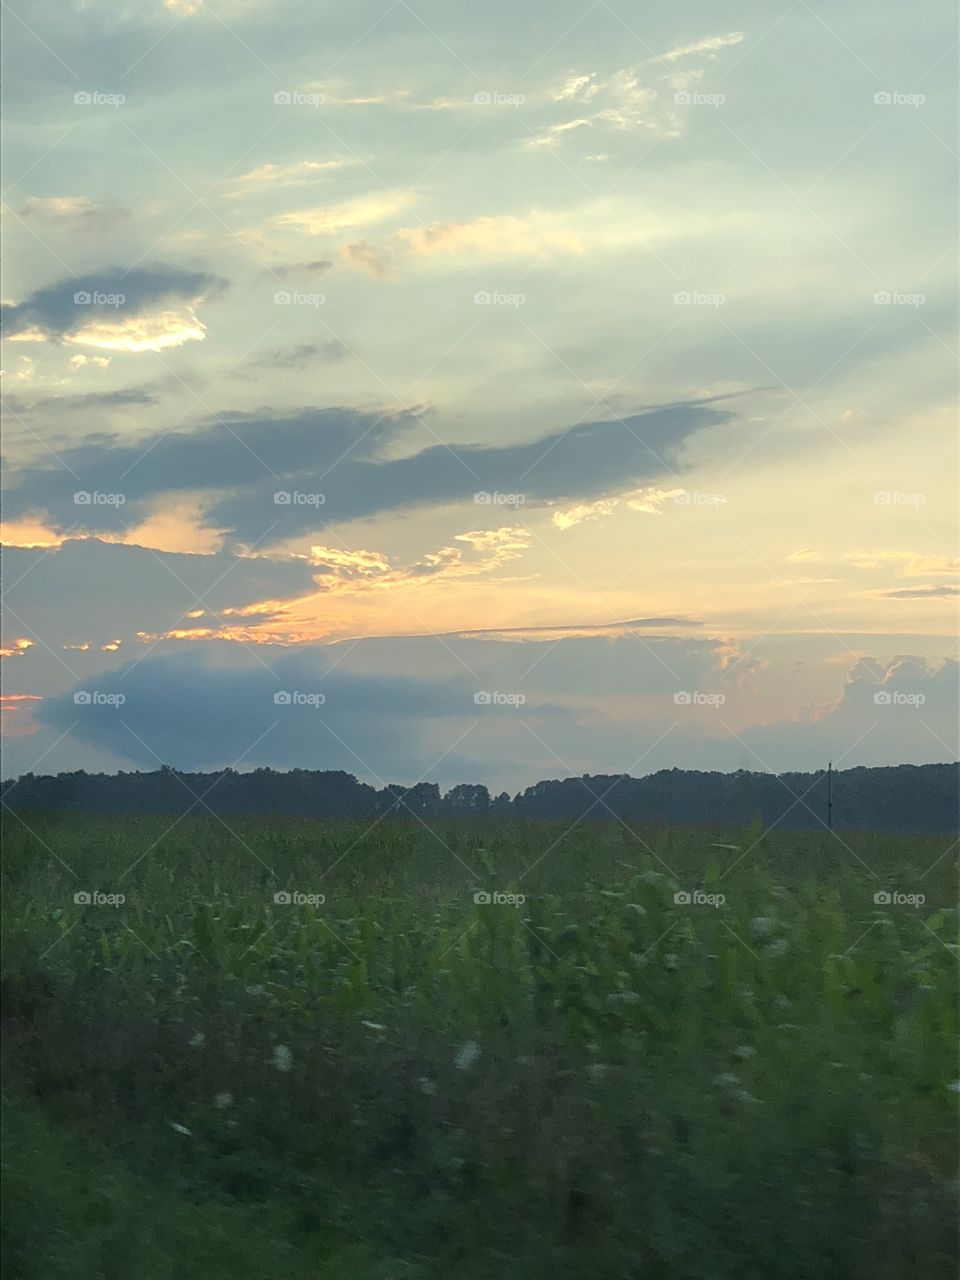 sunset in Indiana 